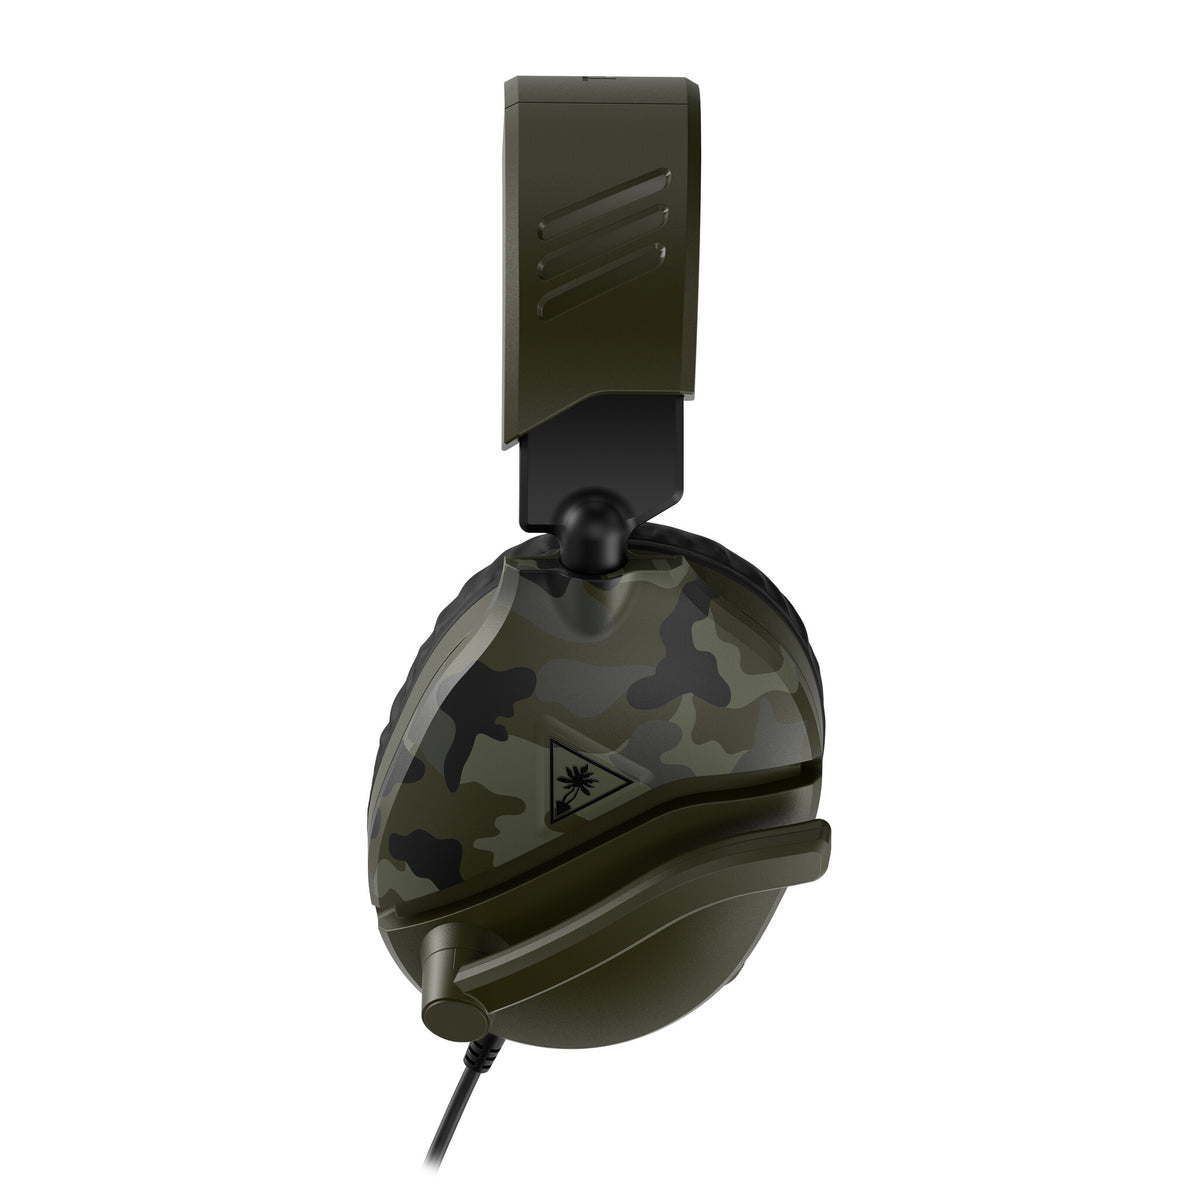 Turtle Beach Recon 70 - Wired Gaming Headset in Camo Green